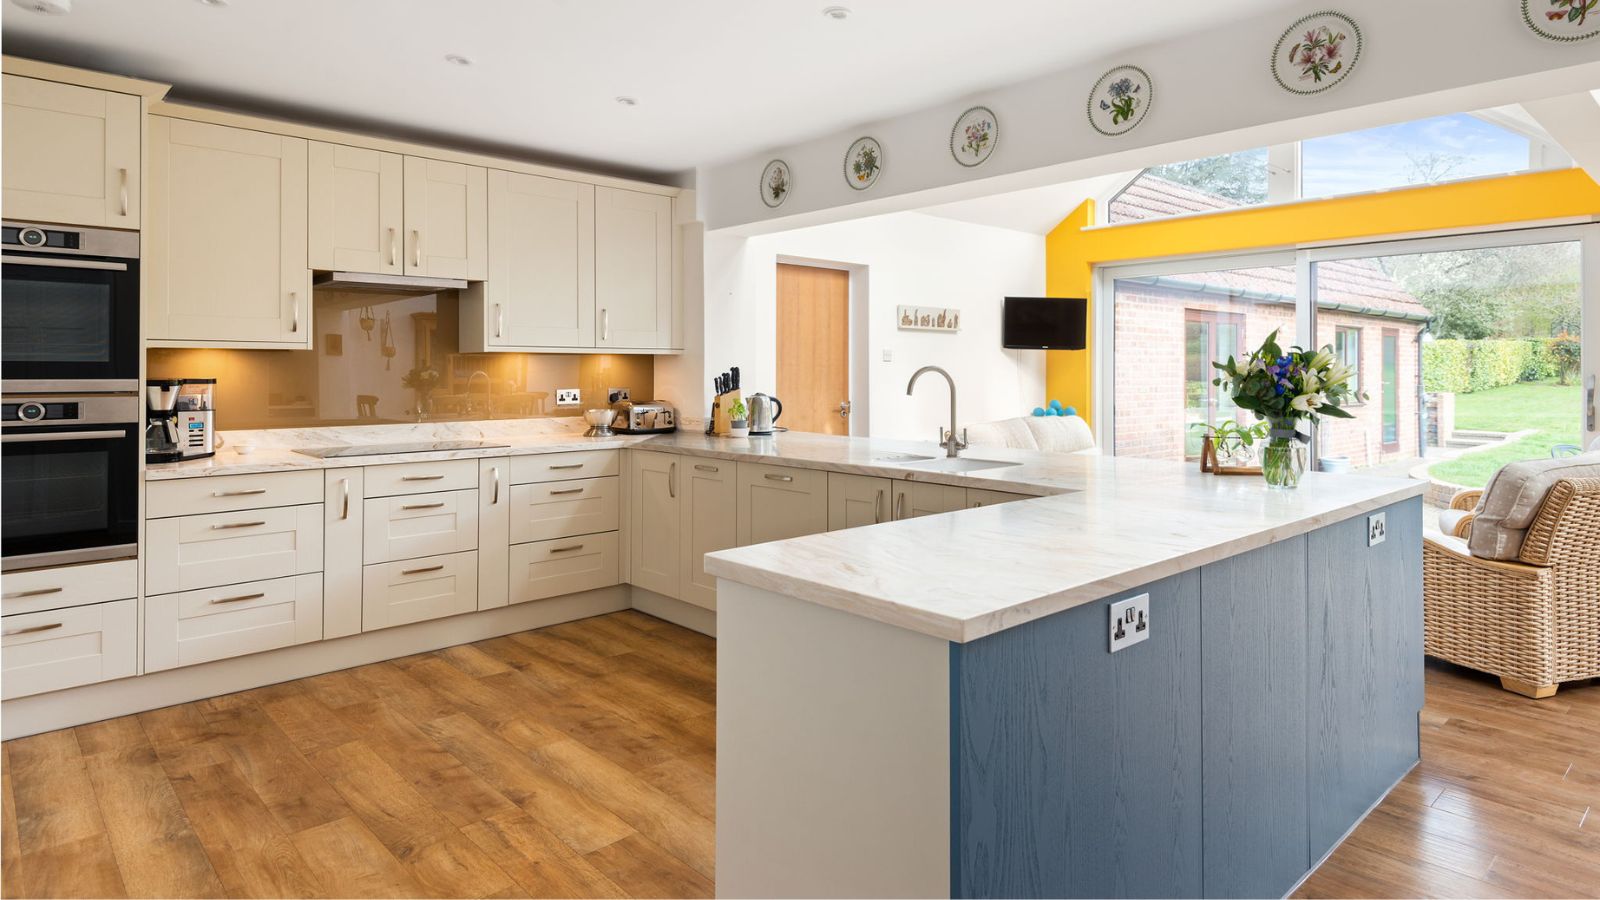 Is blue a good colour for a kitchen?